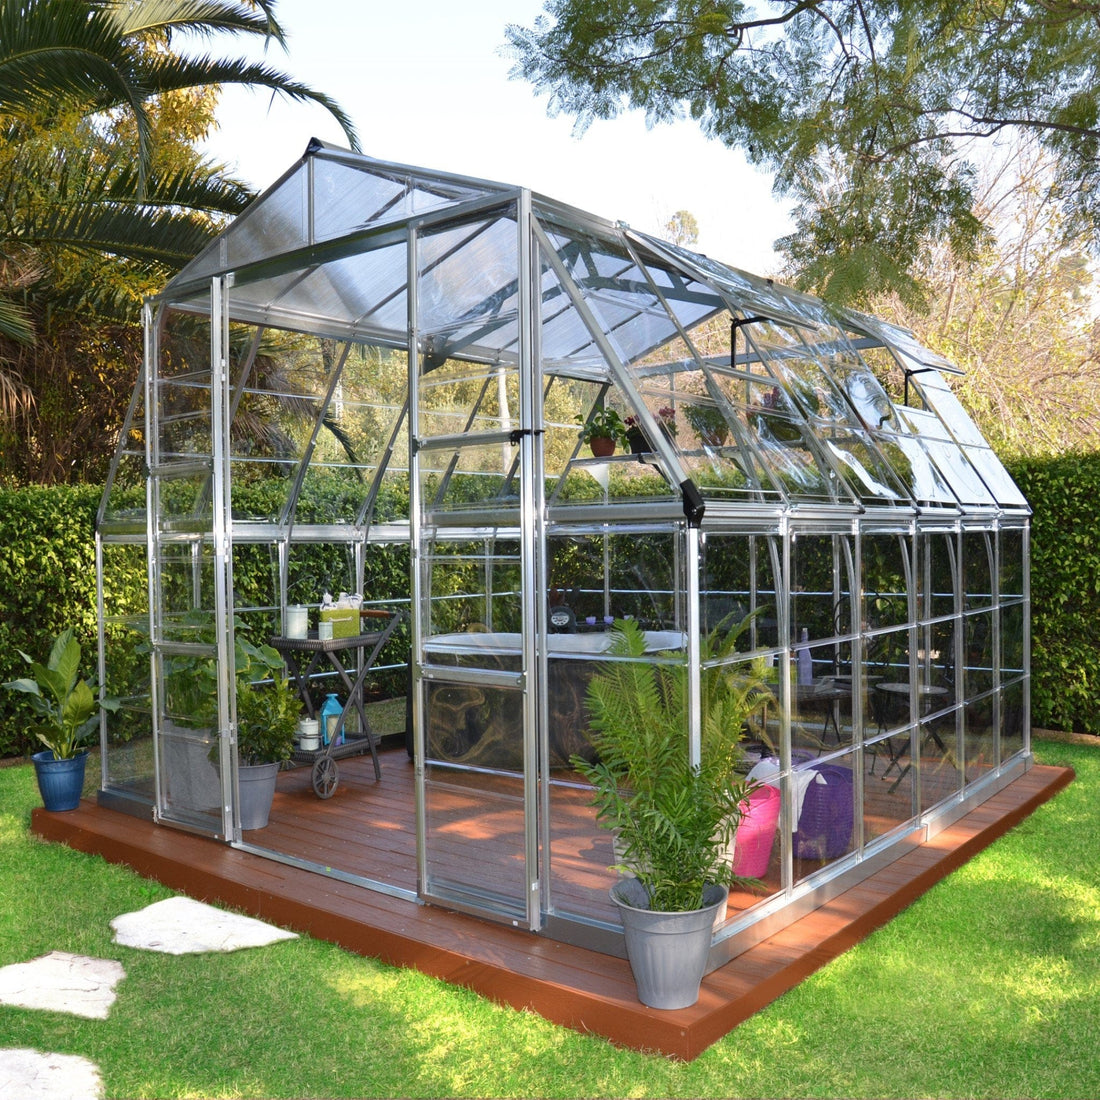 What are some of the properties and differences between acrylic and polycarbonate as a greenhouse glazing material?